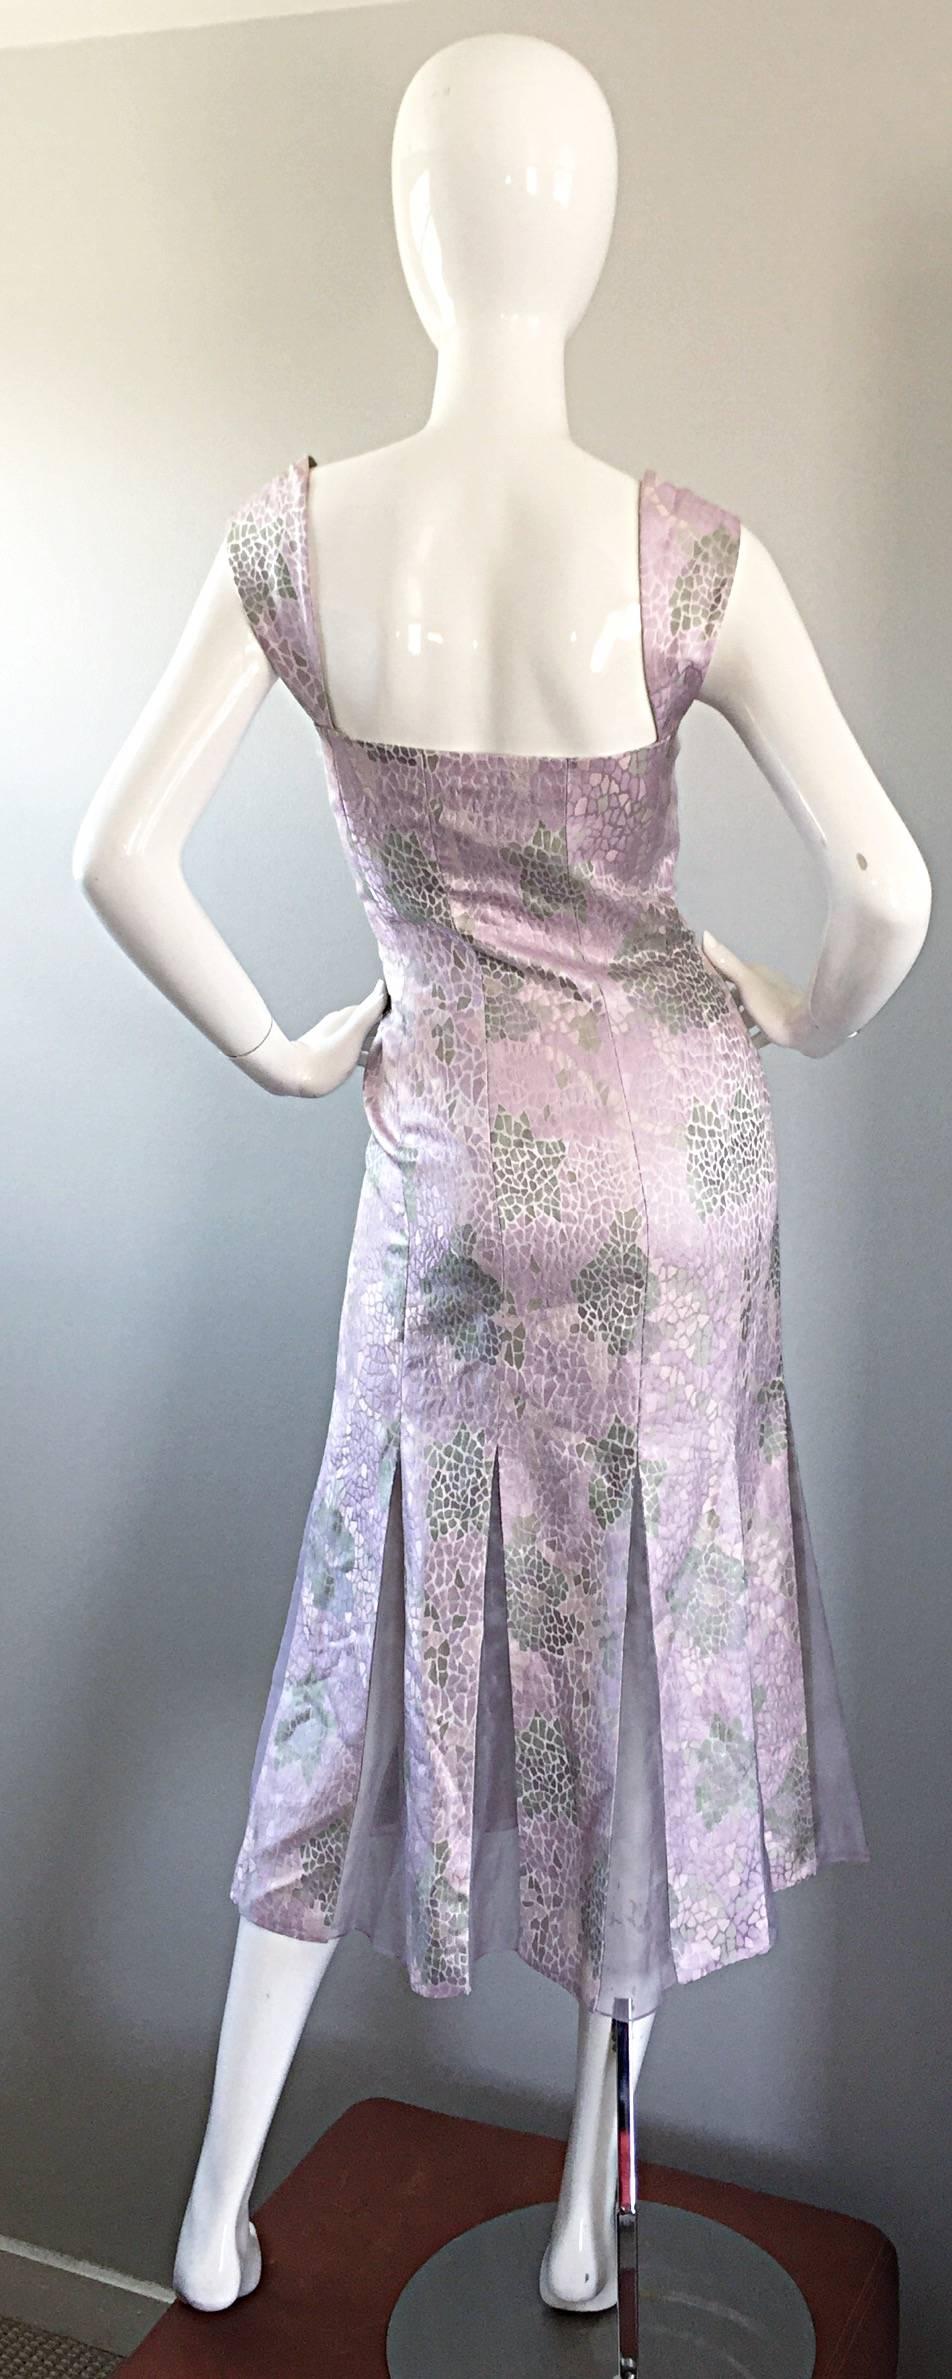 Lily Samii Alligator Reptile Print Pink + Purple + Grey Silk Carwash Hem Dress In Excellent Condition For Sale In San Diego, CA